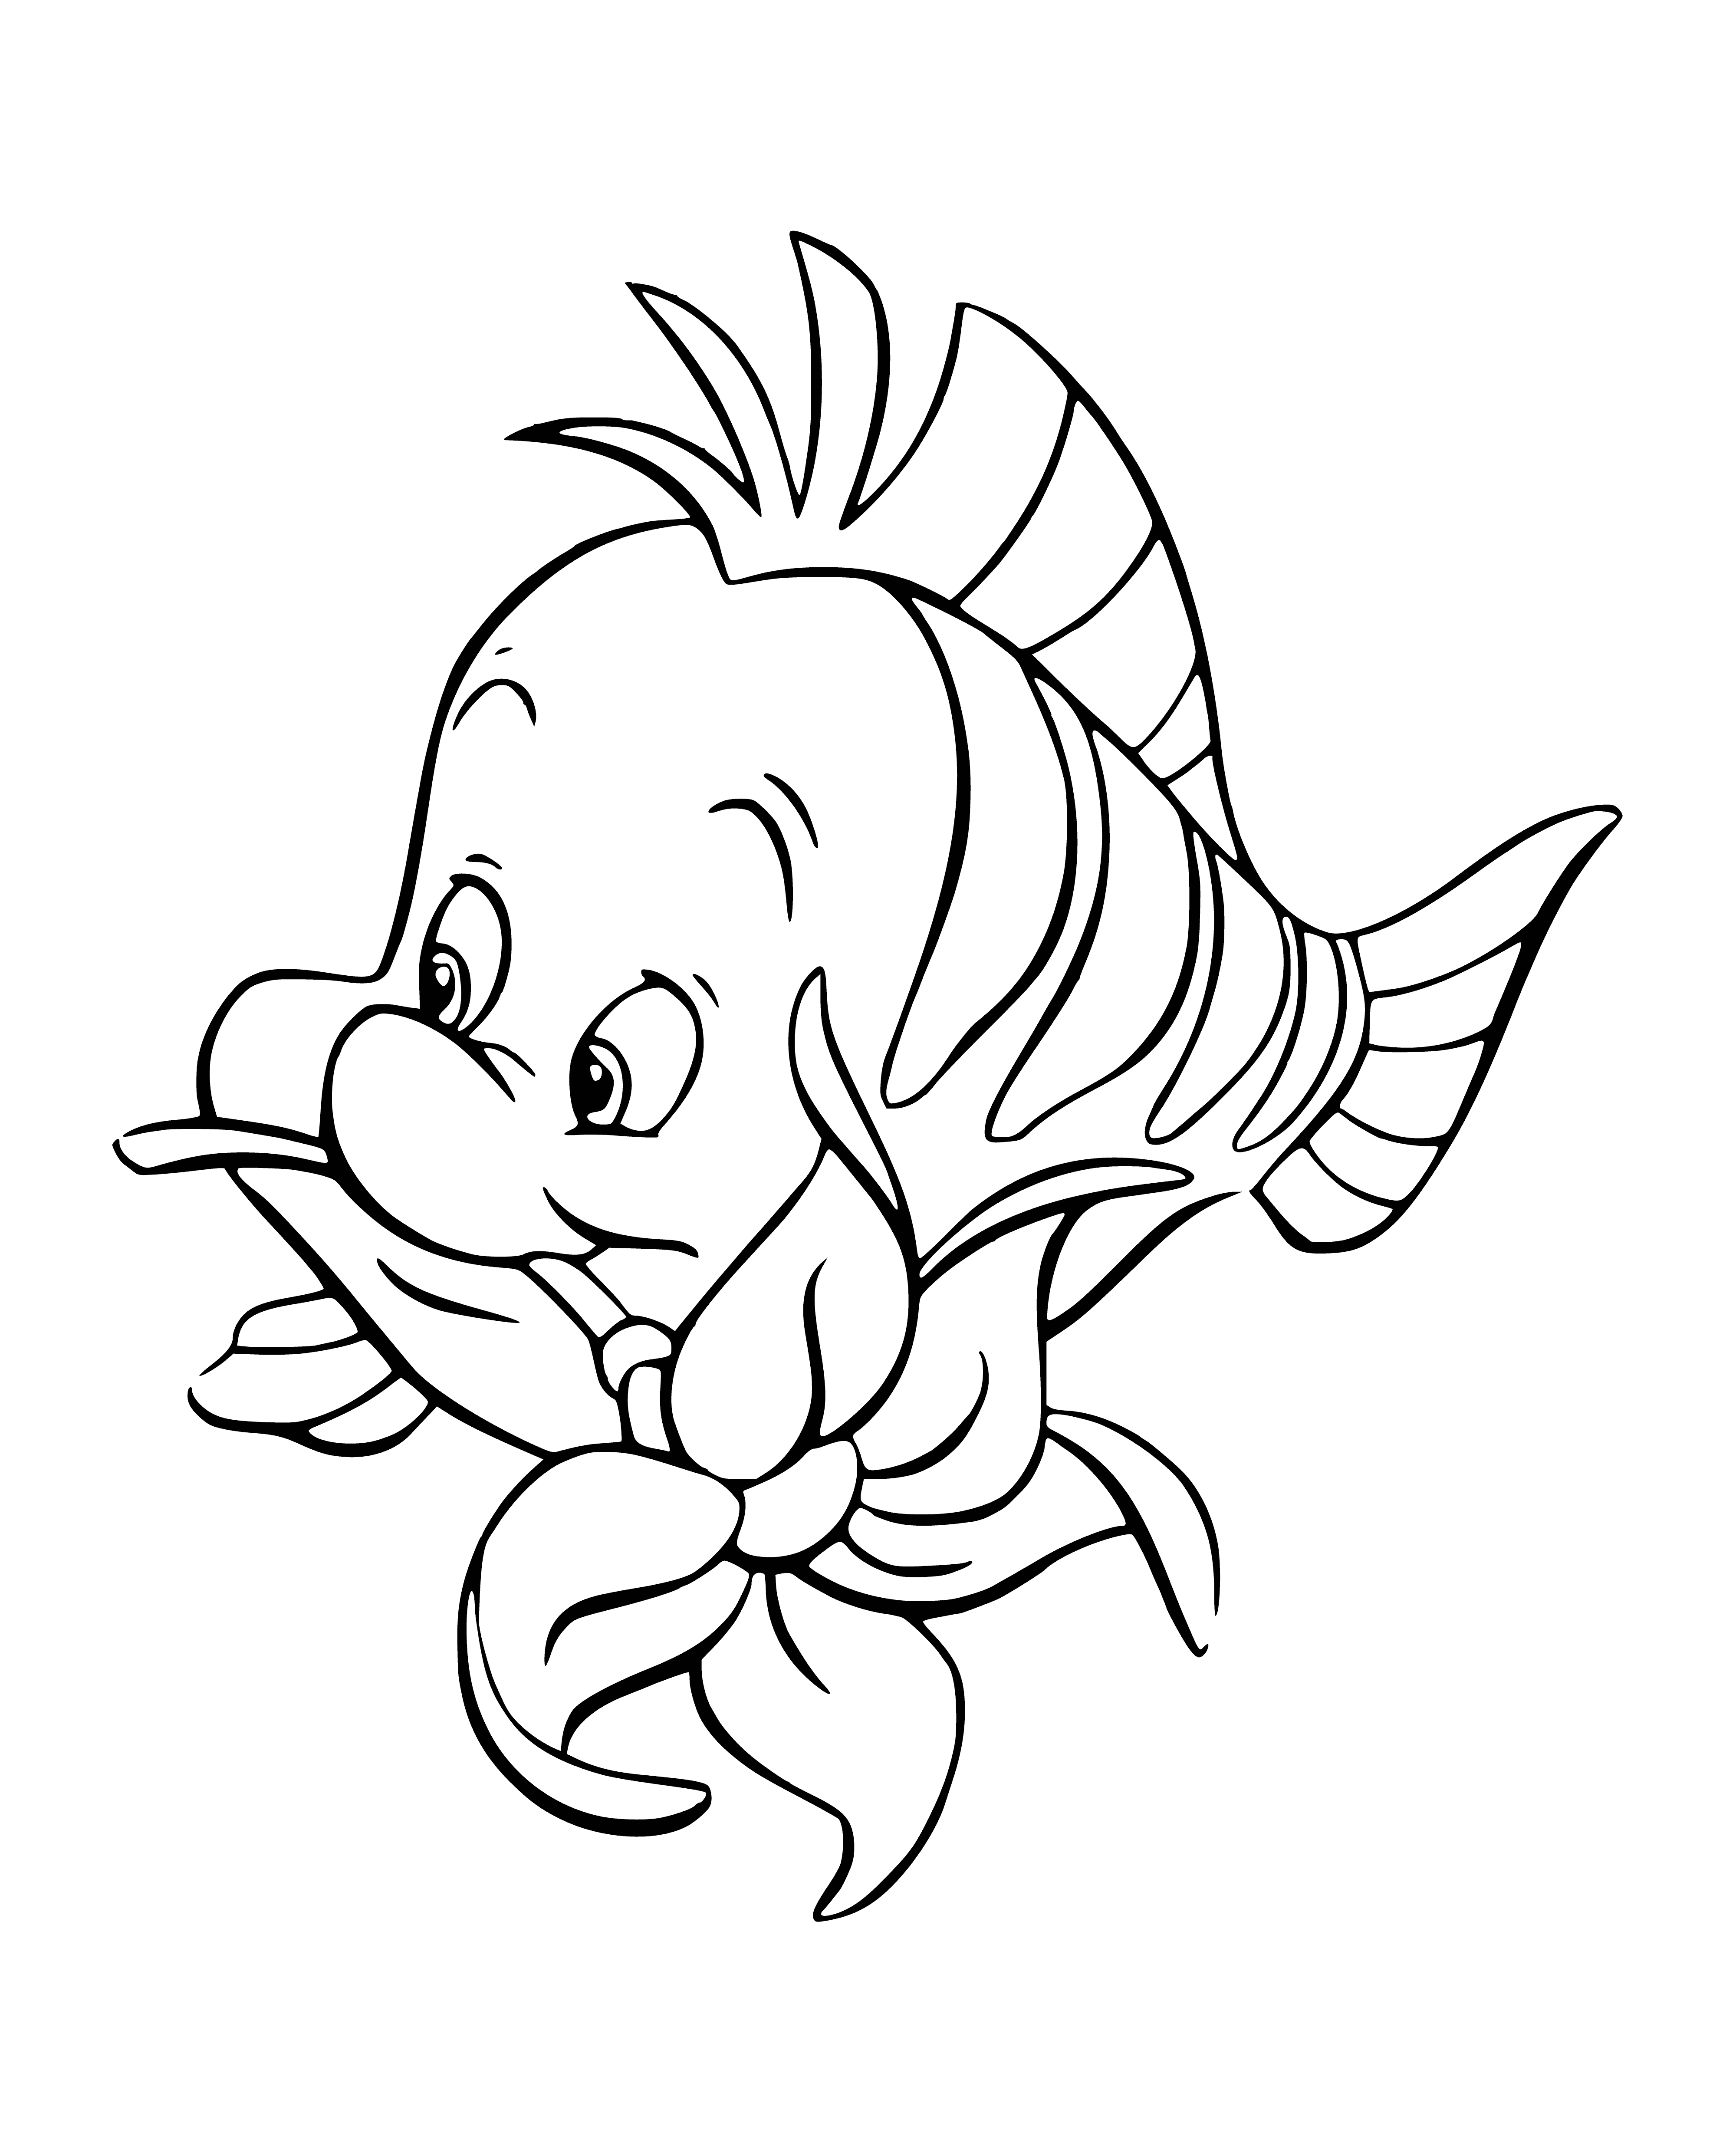 coloring page: Small fish w/ blue, yellow & large eyes; small mouth & fins. #aquarium #fish